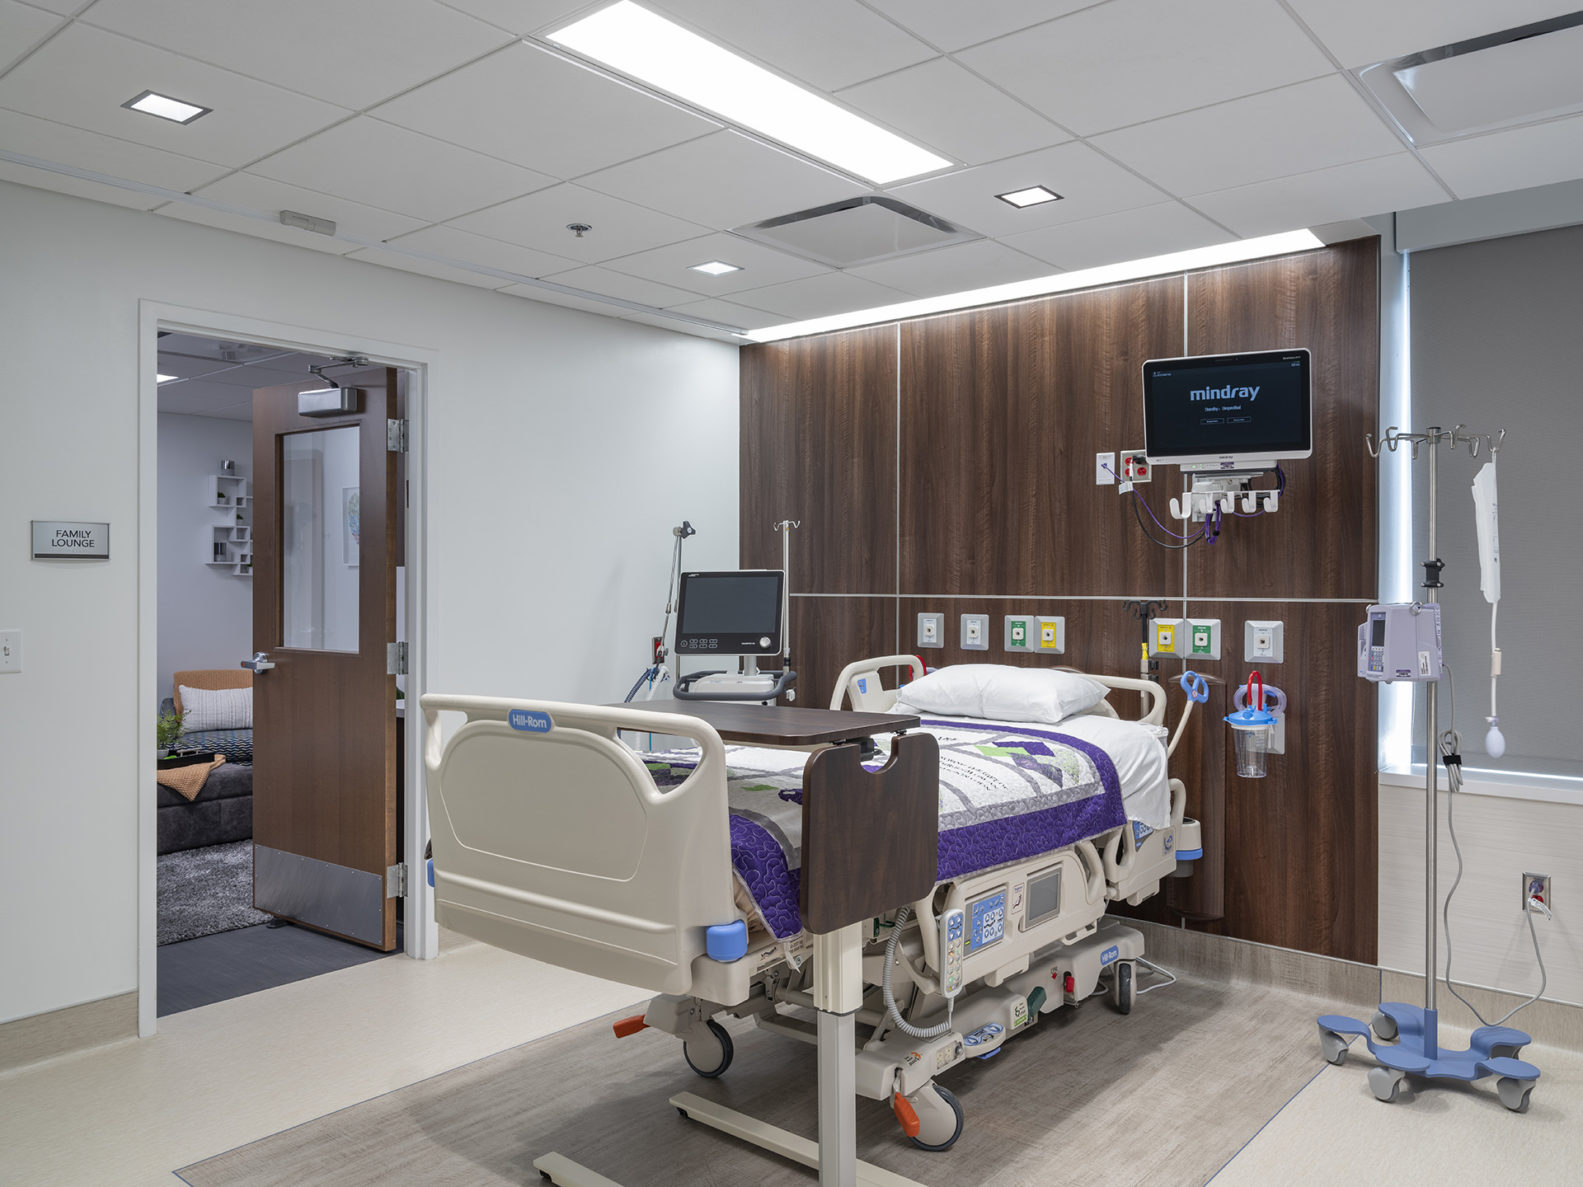 McCownGordon's healthcare team recently completed construction at Midwest Transplant Network